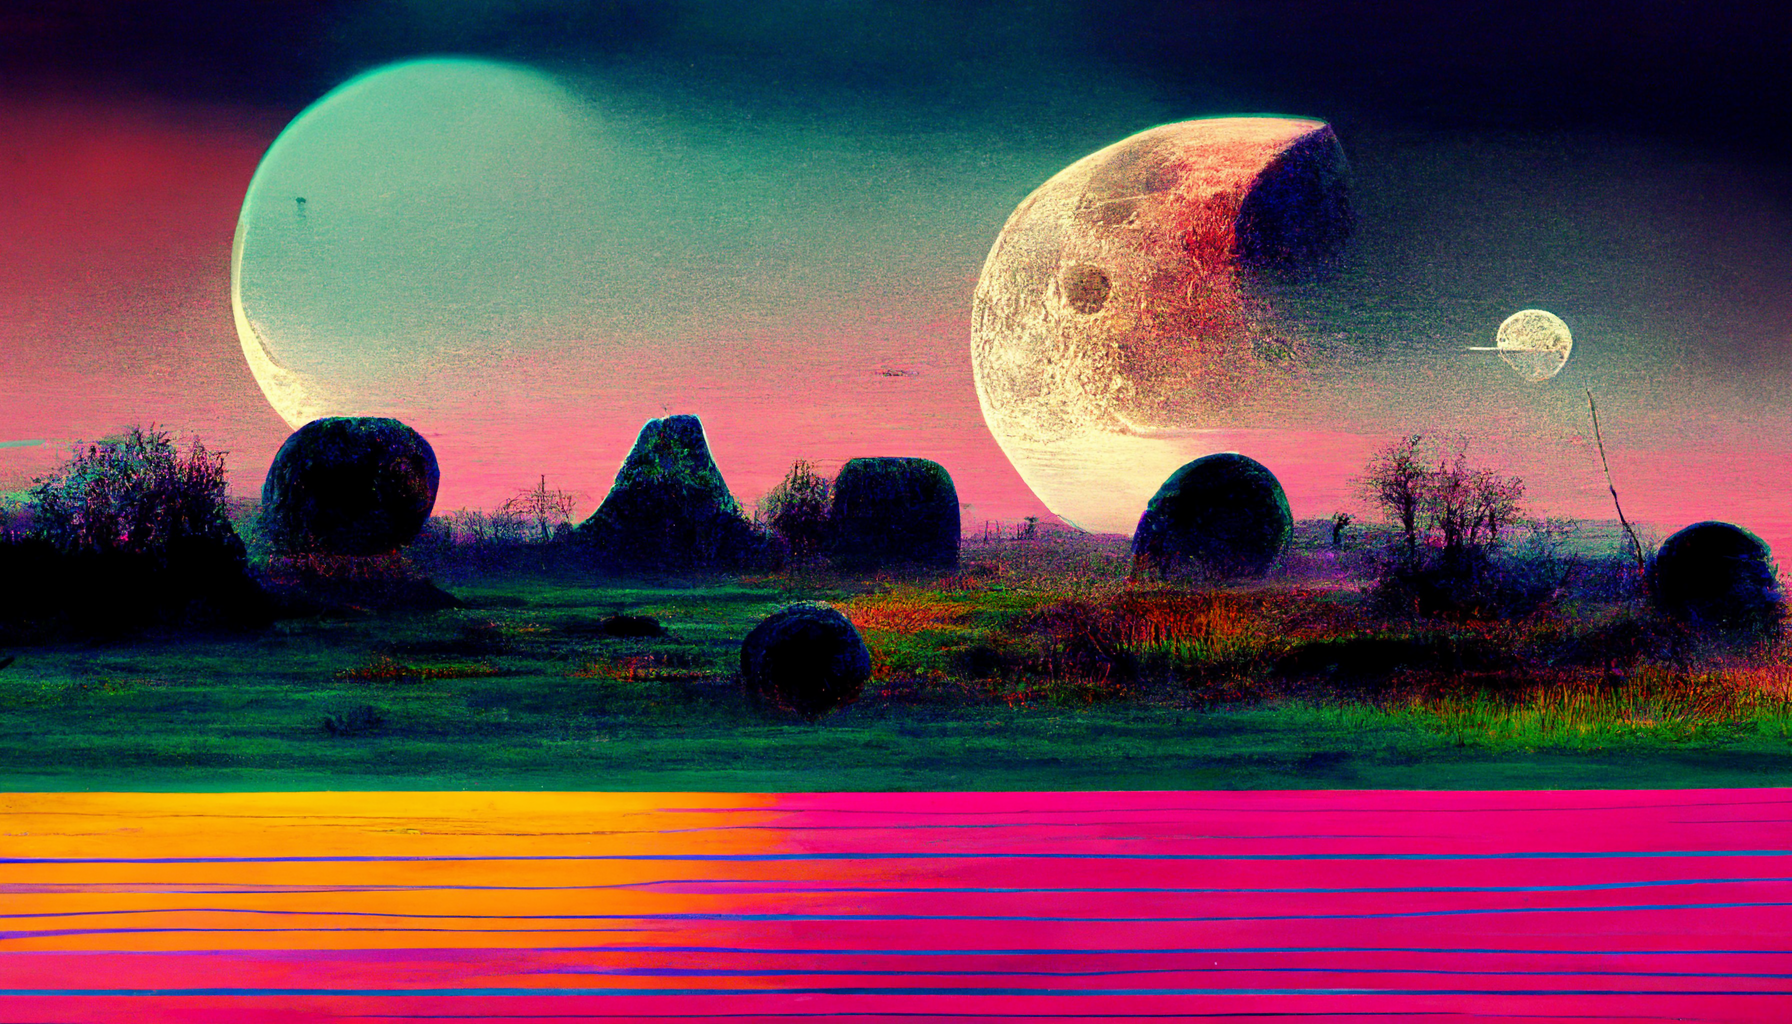 A fourth AI-generated image of a dreamy 80s landscape, this one with three moons, and some boulders and trees in the foreground in silhouette